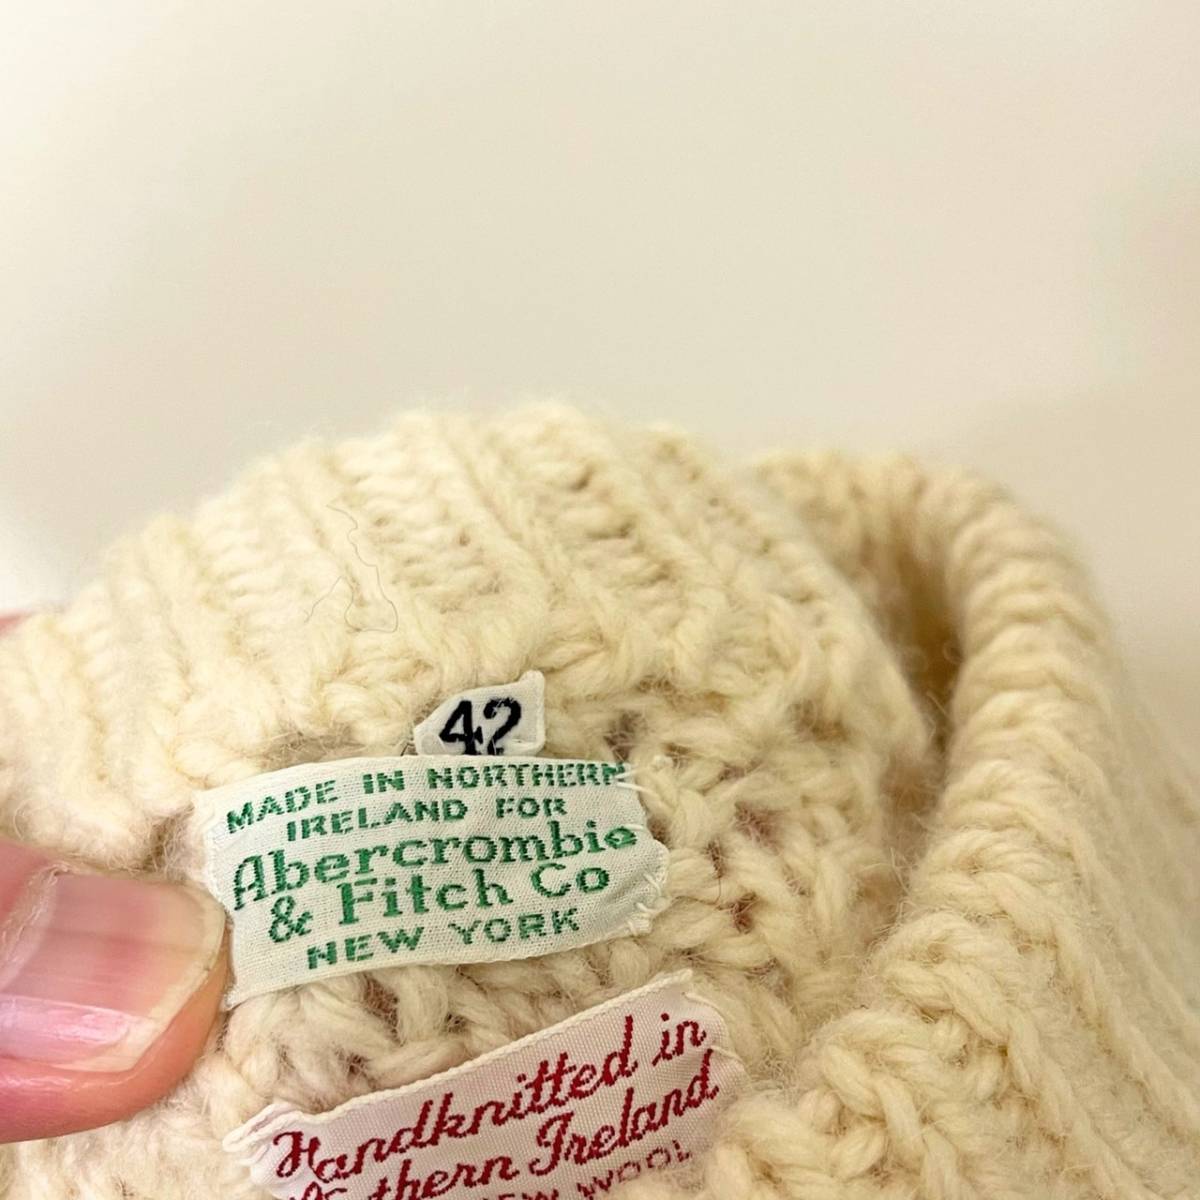  rare { Mint Condition / ABERCROMBIE&FITCH / 42 }60s70s finest quality goods [ Abercrombie & Fitch i-ll Land made hand knitted Vintage Alain sweater ]